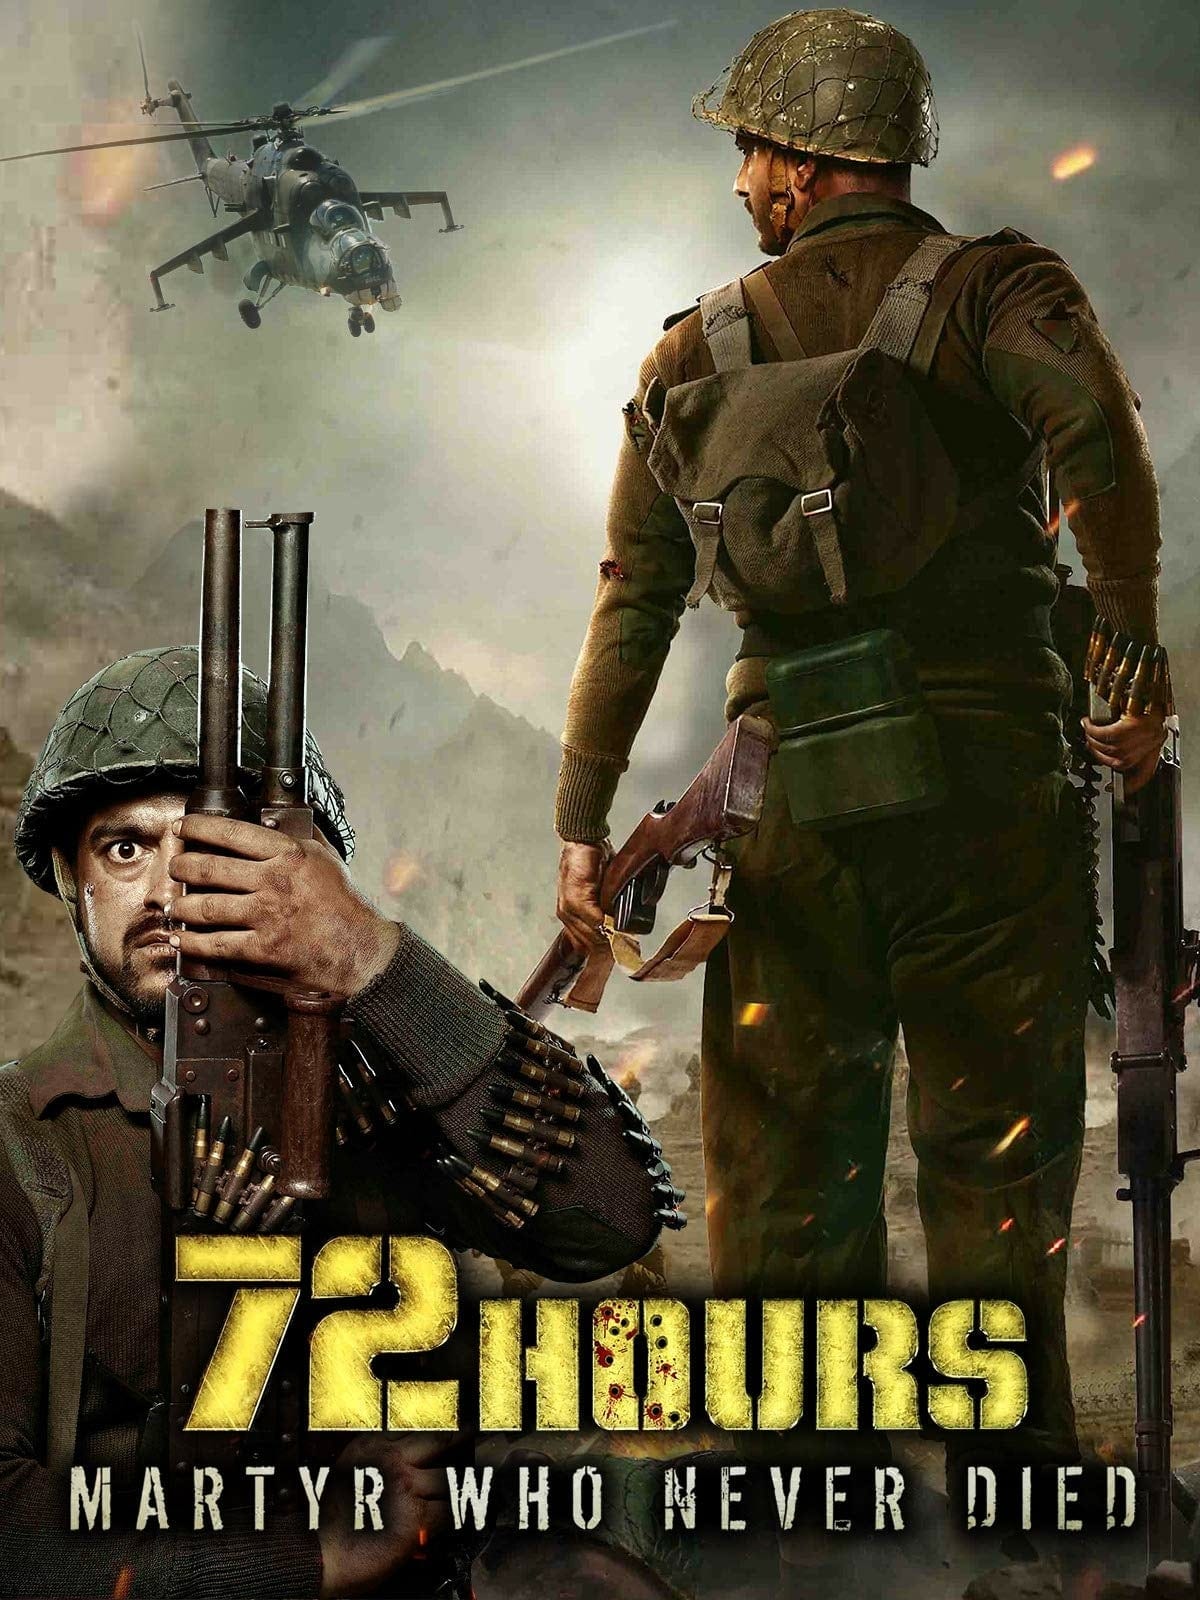 Poster for the movie "72 Hours: Martyr Who Never Died"